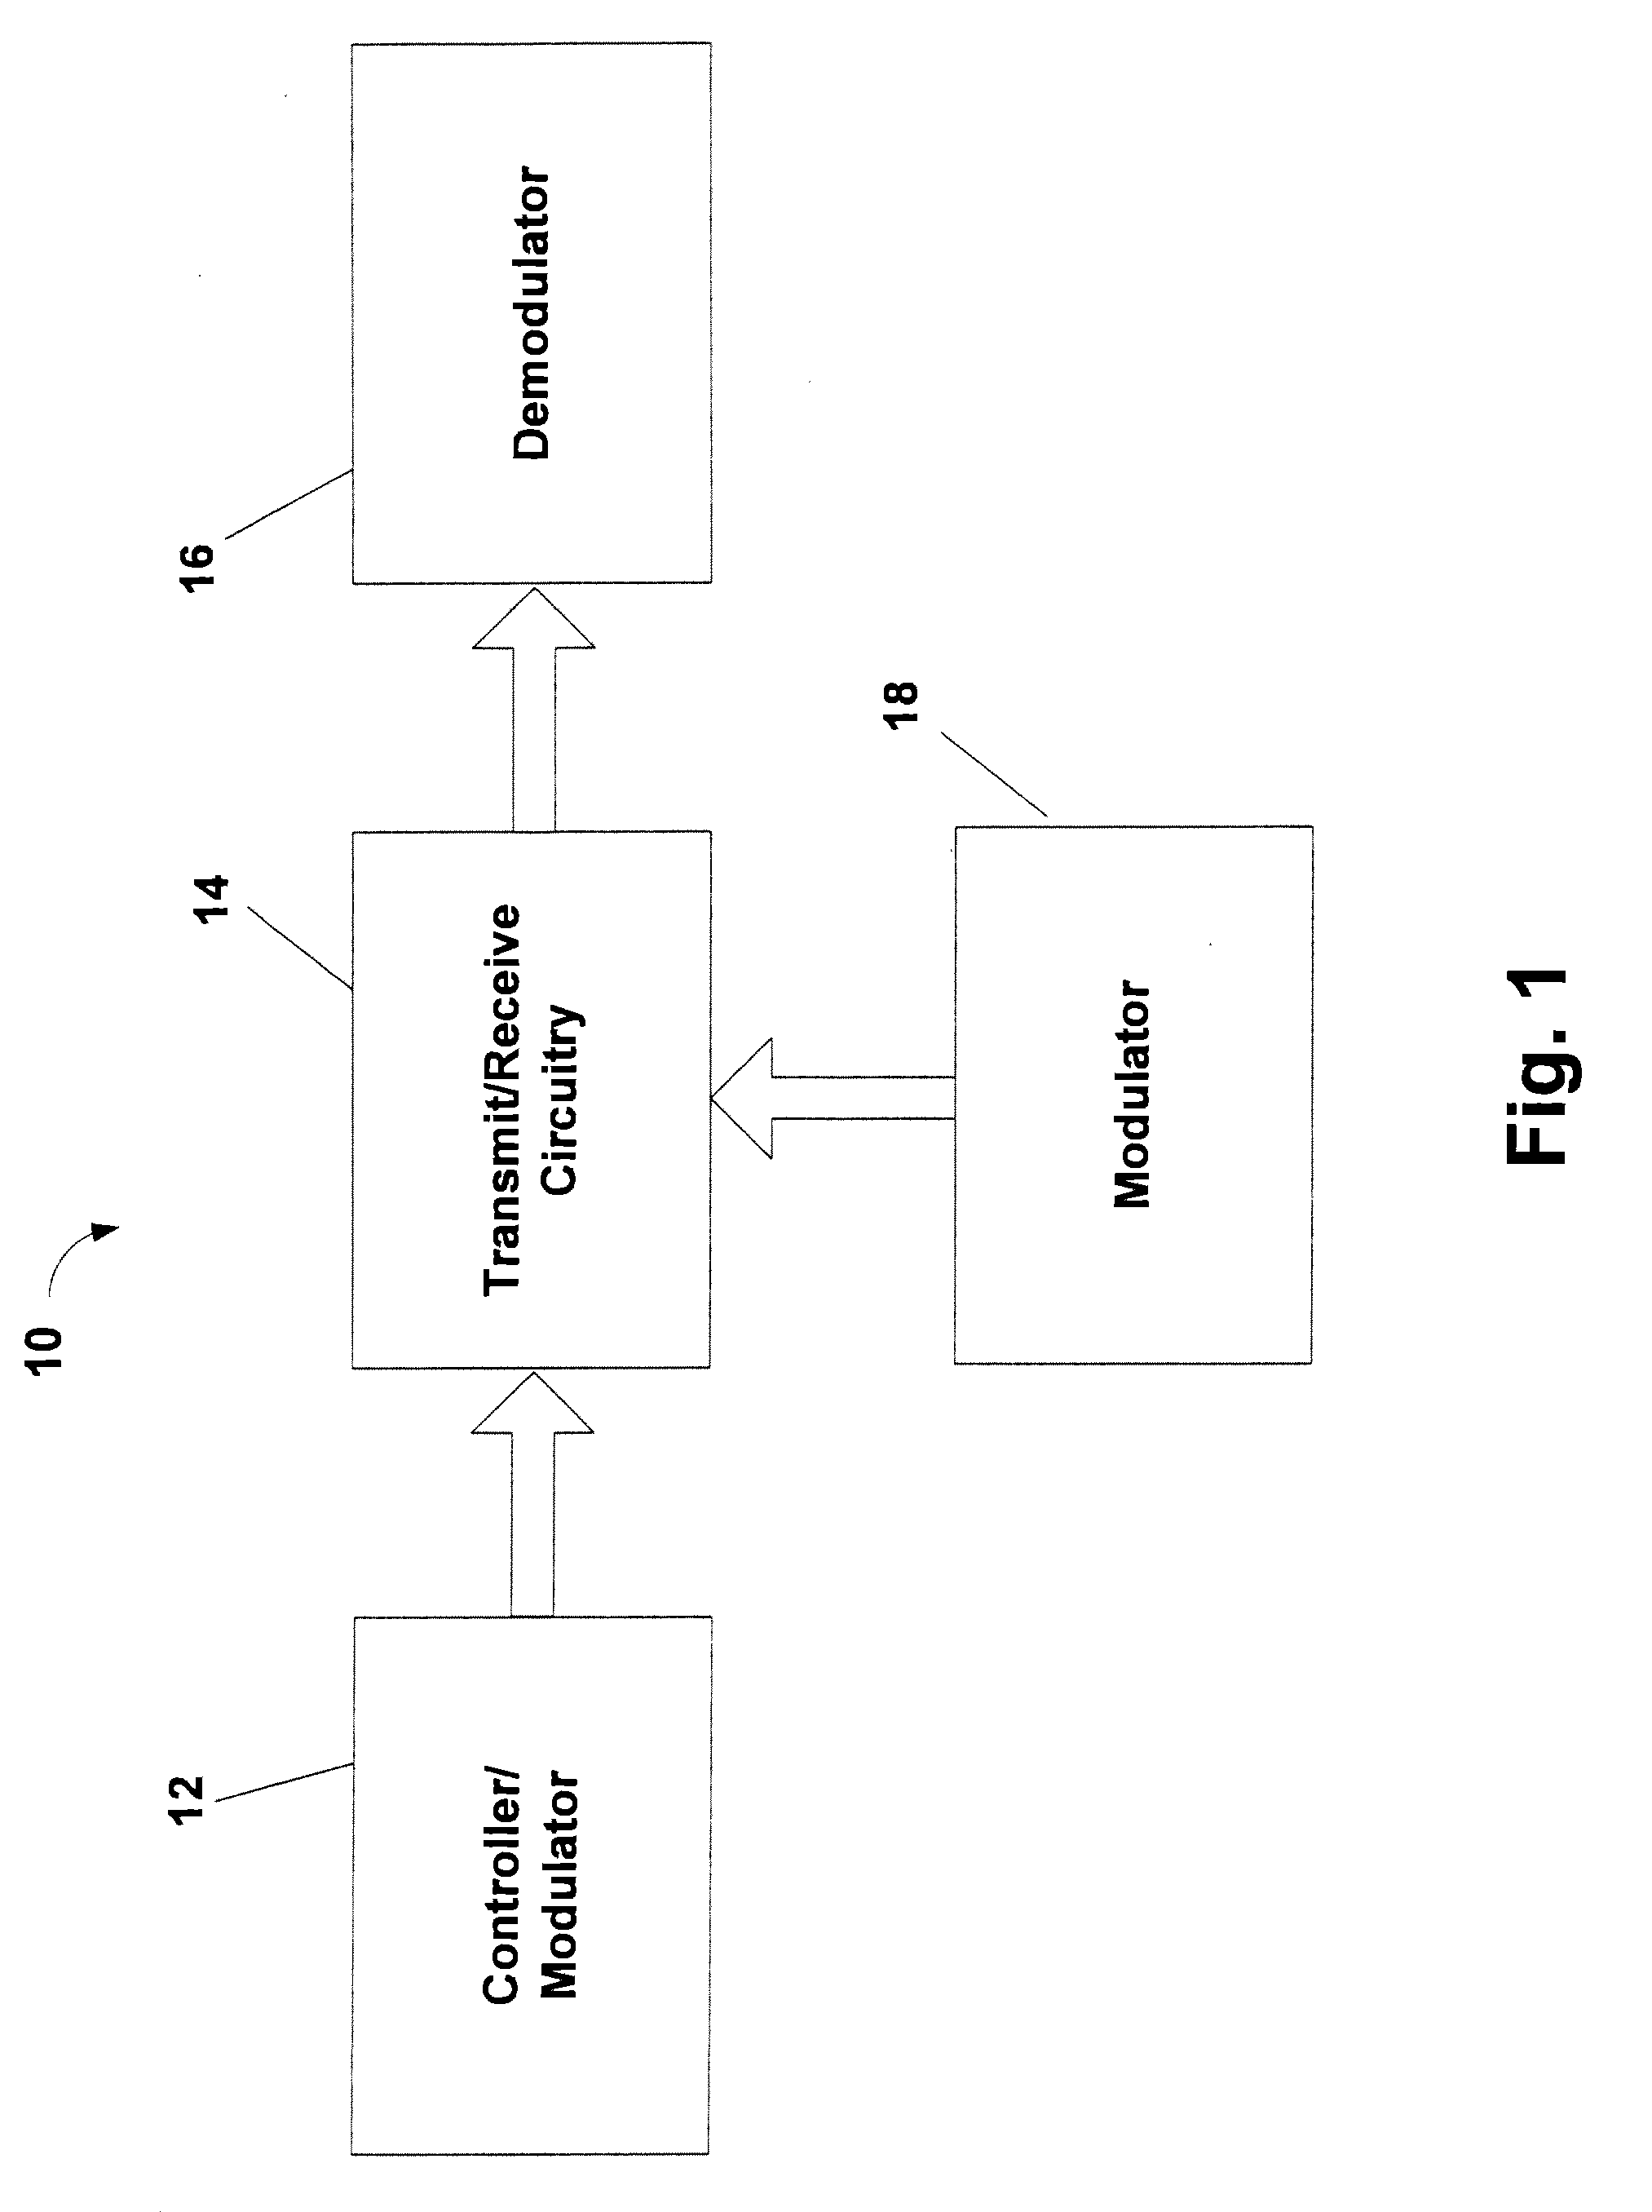 Telemetry system and method with variable parameters